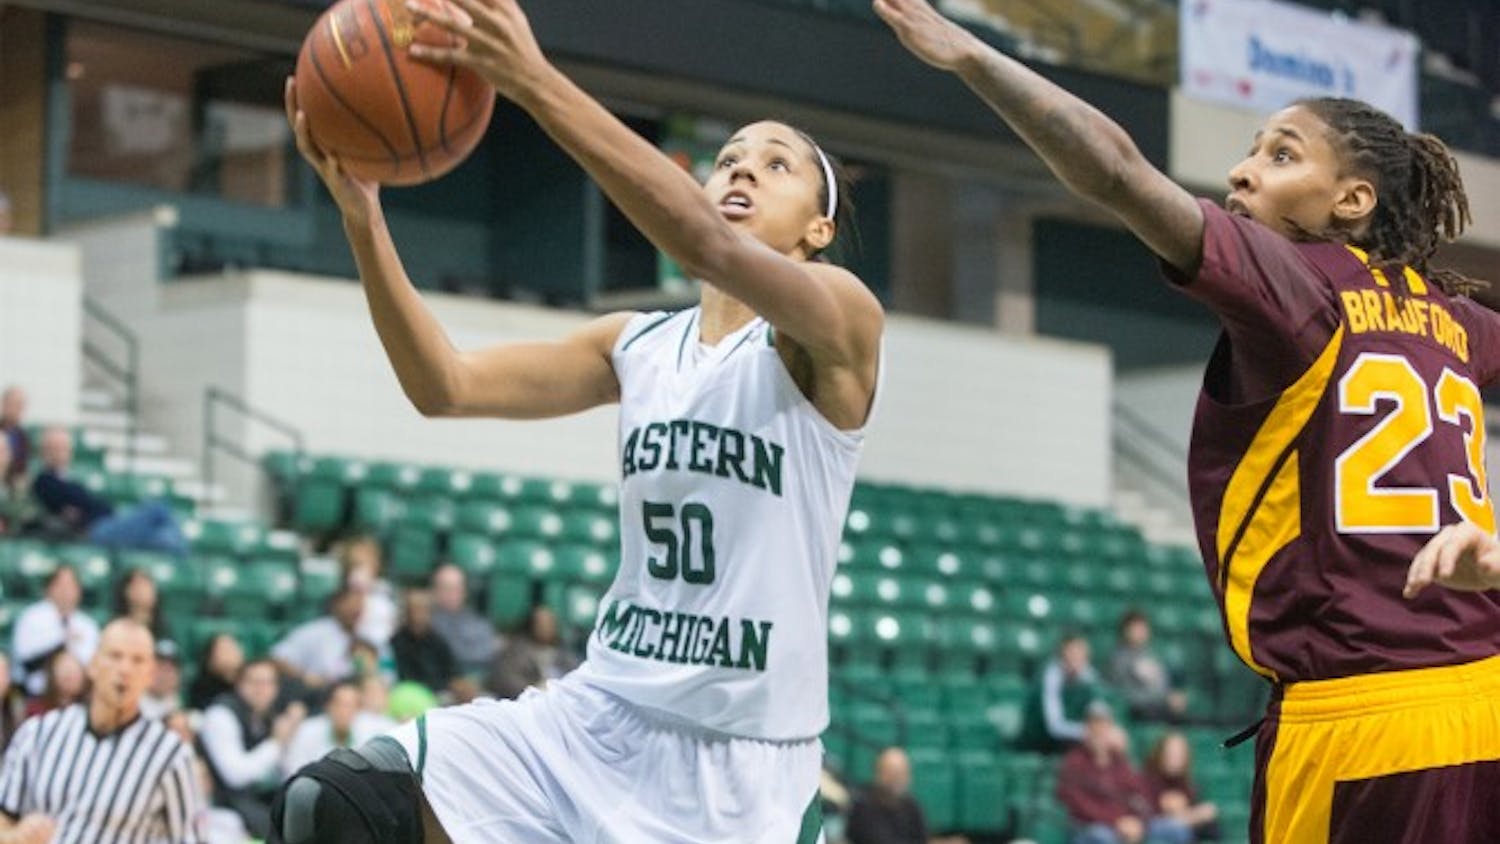 Eastern Michigan's Natachia Watkins beats the defense and scores during the Eagle's 99-83 Senior-Day win over Central Michigan on 8 March at the Convocation Center.